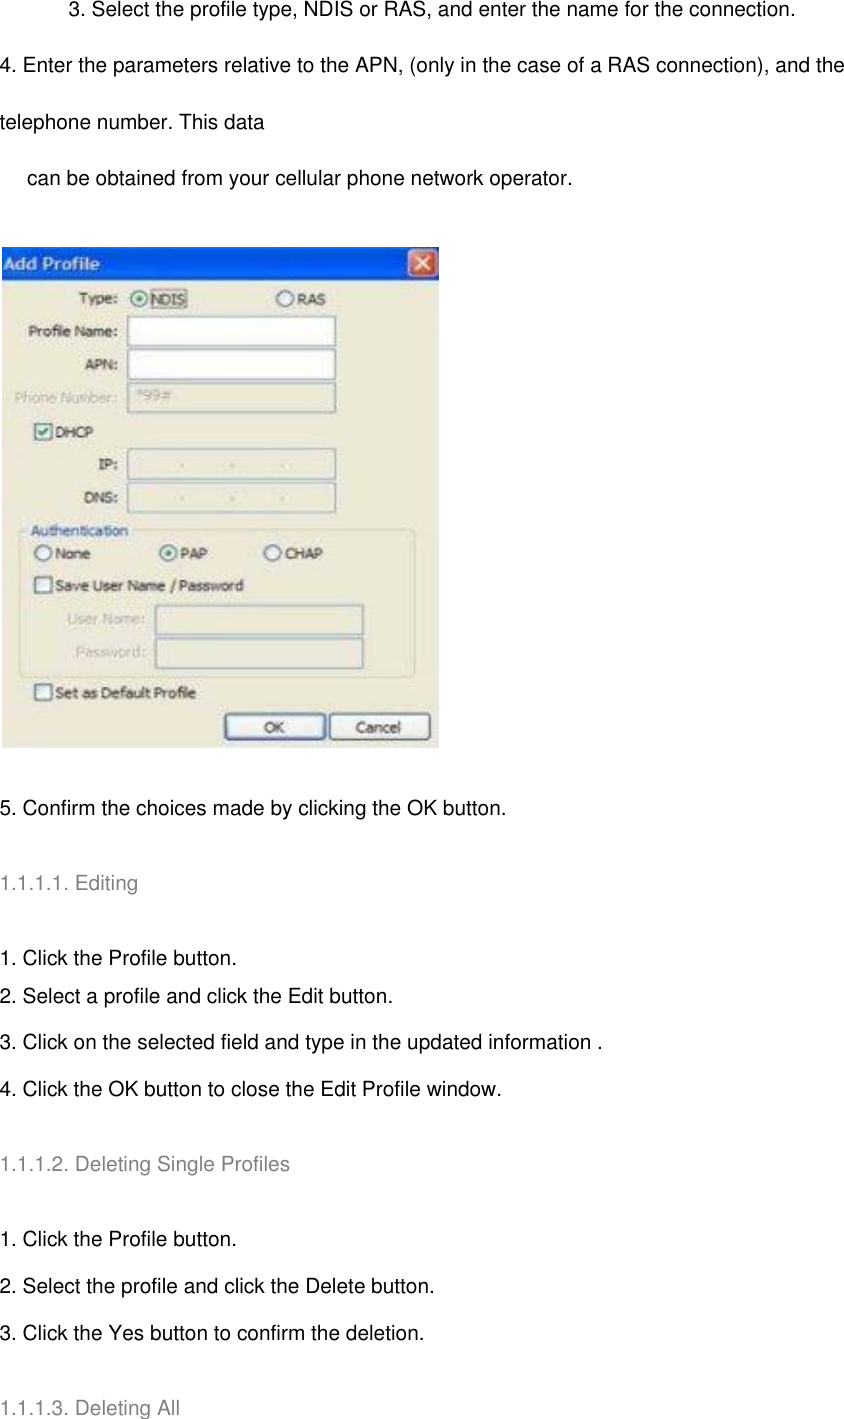 3. Select the profile type, NDIS or RAS, and enter the name for the connection. 4. Enter the parameters relative to the APN, (only in the case of a RAS connection), and the telephone number. This data          can be obtained from your cellular phone network operator.  5. Confirm the choices made by clicking the OK button.   1.1.1.1. Editing   1. Click the Profile button. 2. Select a profile and click the Edit button. 3. Click on the selected field and type in the updated information . 4. Click the OK button to close the Edit Profile window.   1.1.1.2. Deleting Single Profiles     1. Click the Profile button. 2. Select the profile and click the Delete button. 3. Click the Yes button to confirm the deletion.   1.1.1.3. Deleting All 